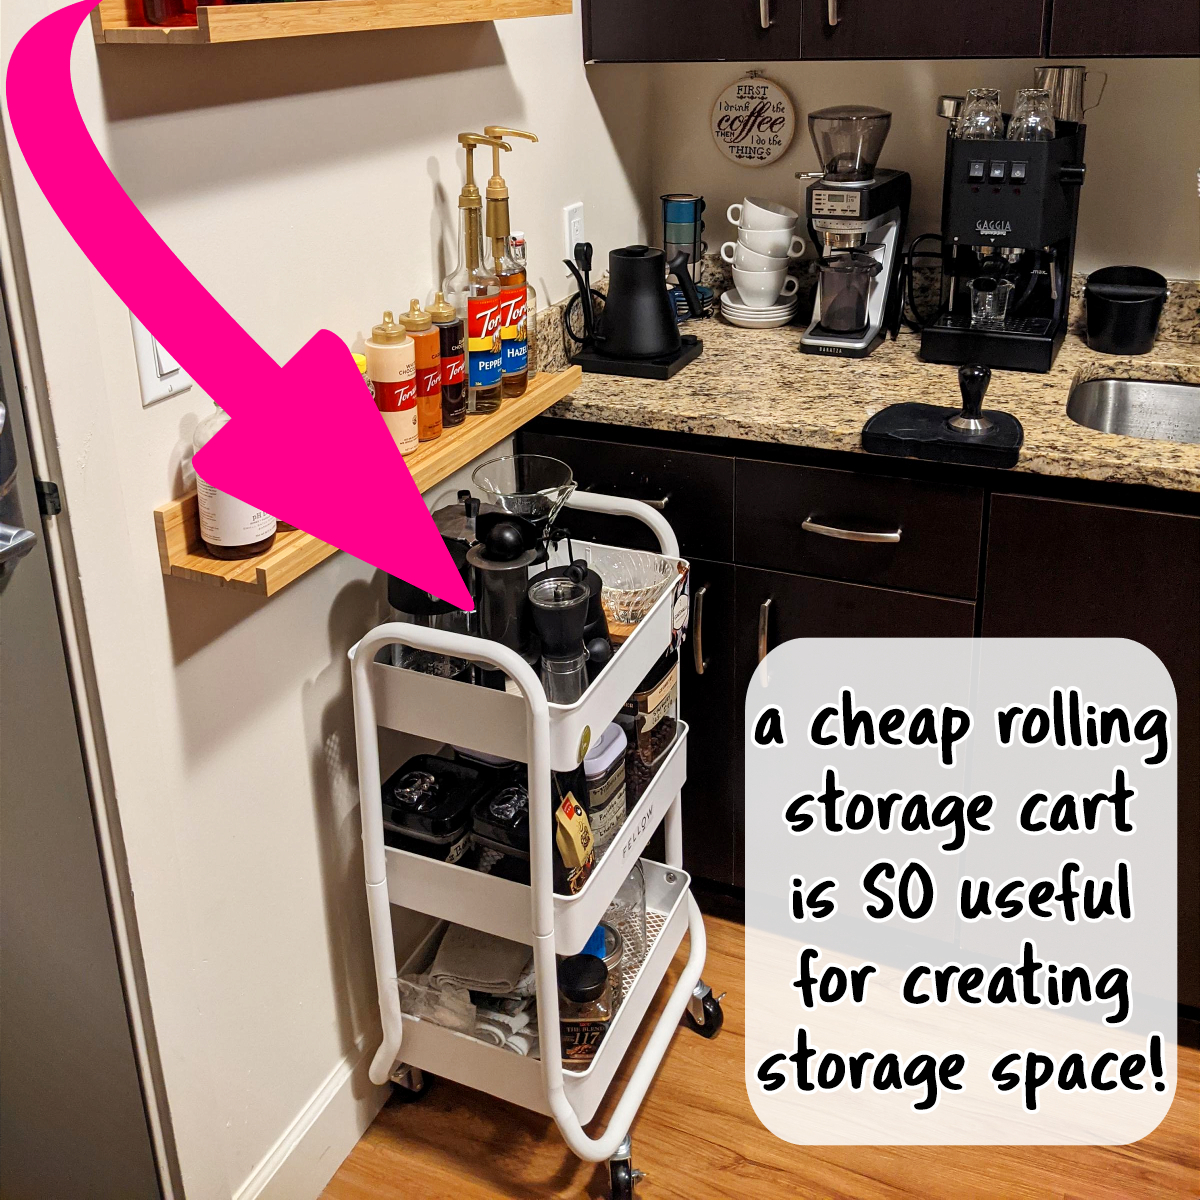 small apartment storage ideas that really work! life hacks for small apartments - this tiny rental kitchen created more storage space with a cheap organizer cart